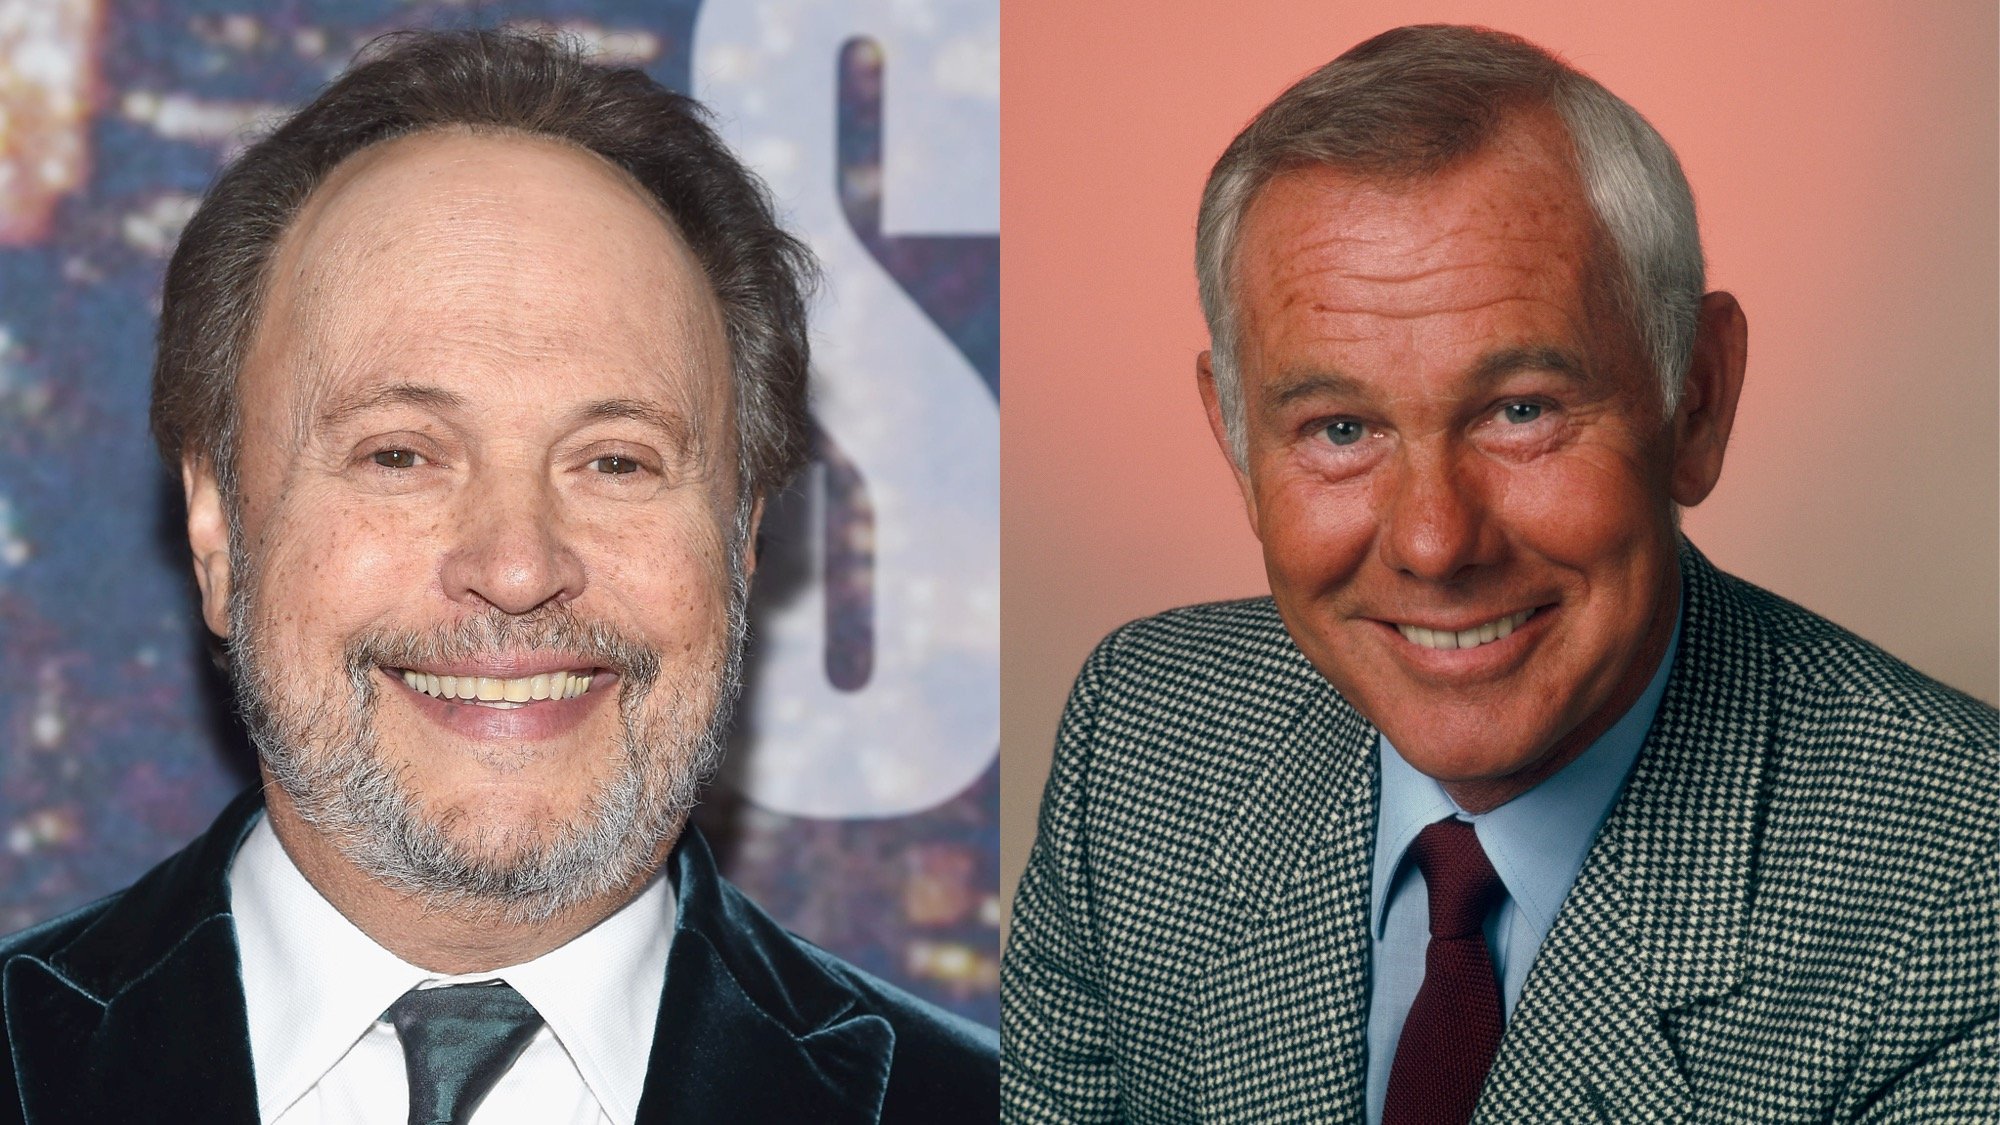 (L) Billy Crystal attends the SNL 40th Anniversary Celebration at Rockefeller Plaza on February 15, 2015. (R) A photo of Johnny Carson from 'The Tonight Show.'